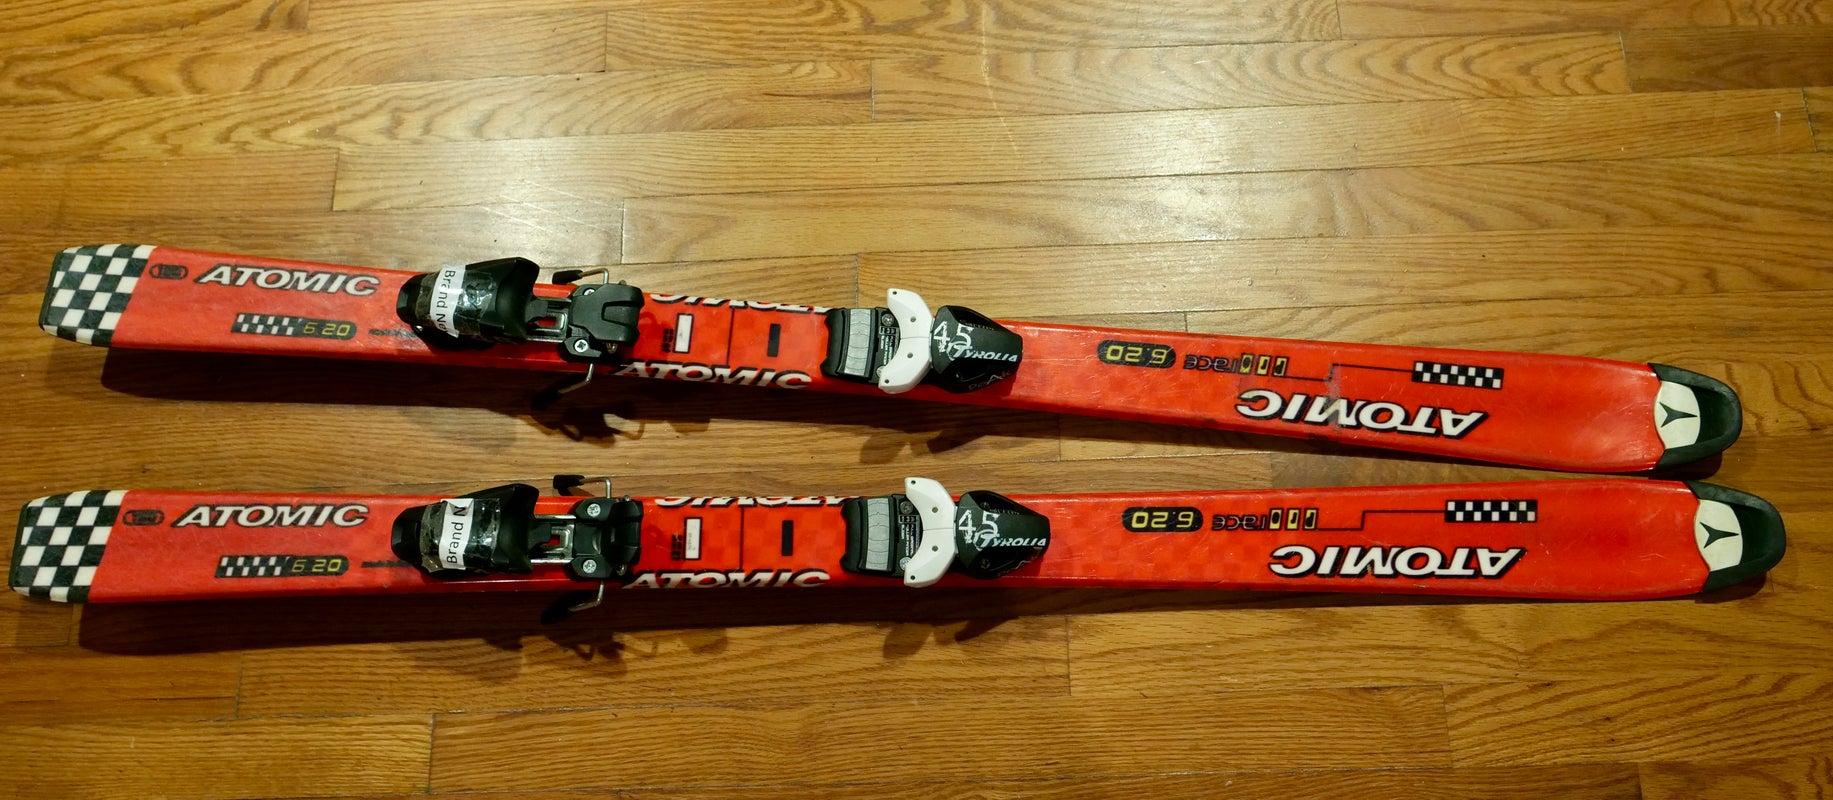 Used Kid's Atomic 130 cm All Mountain Skis Pro Race 6.20 With New Bindings